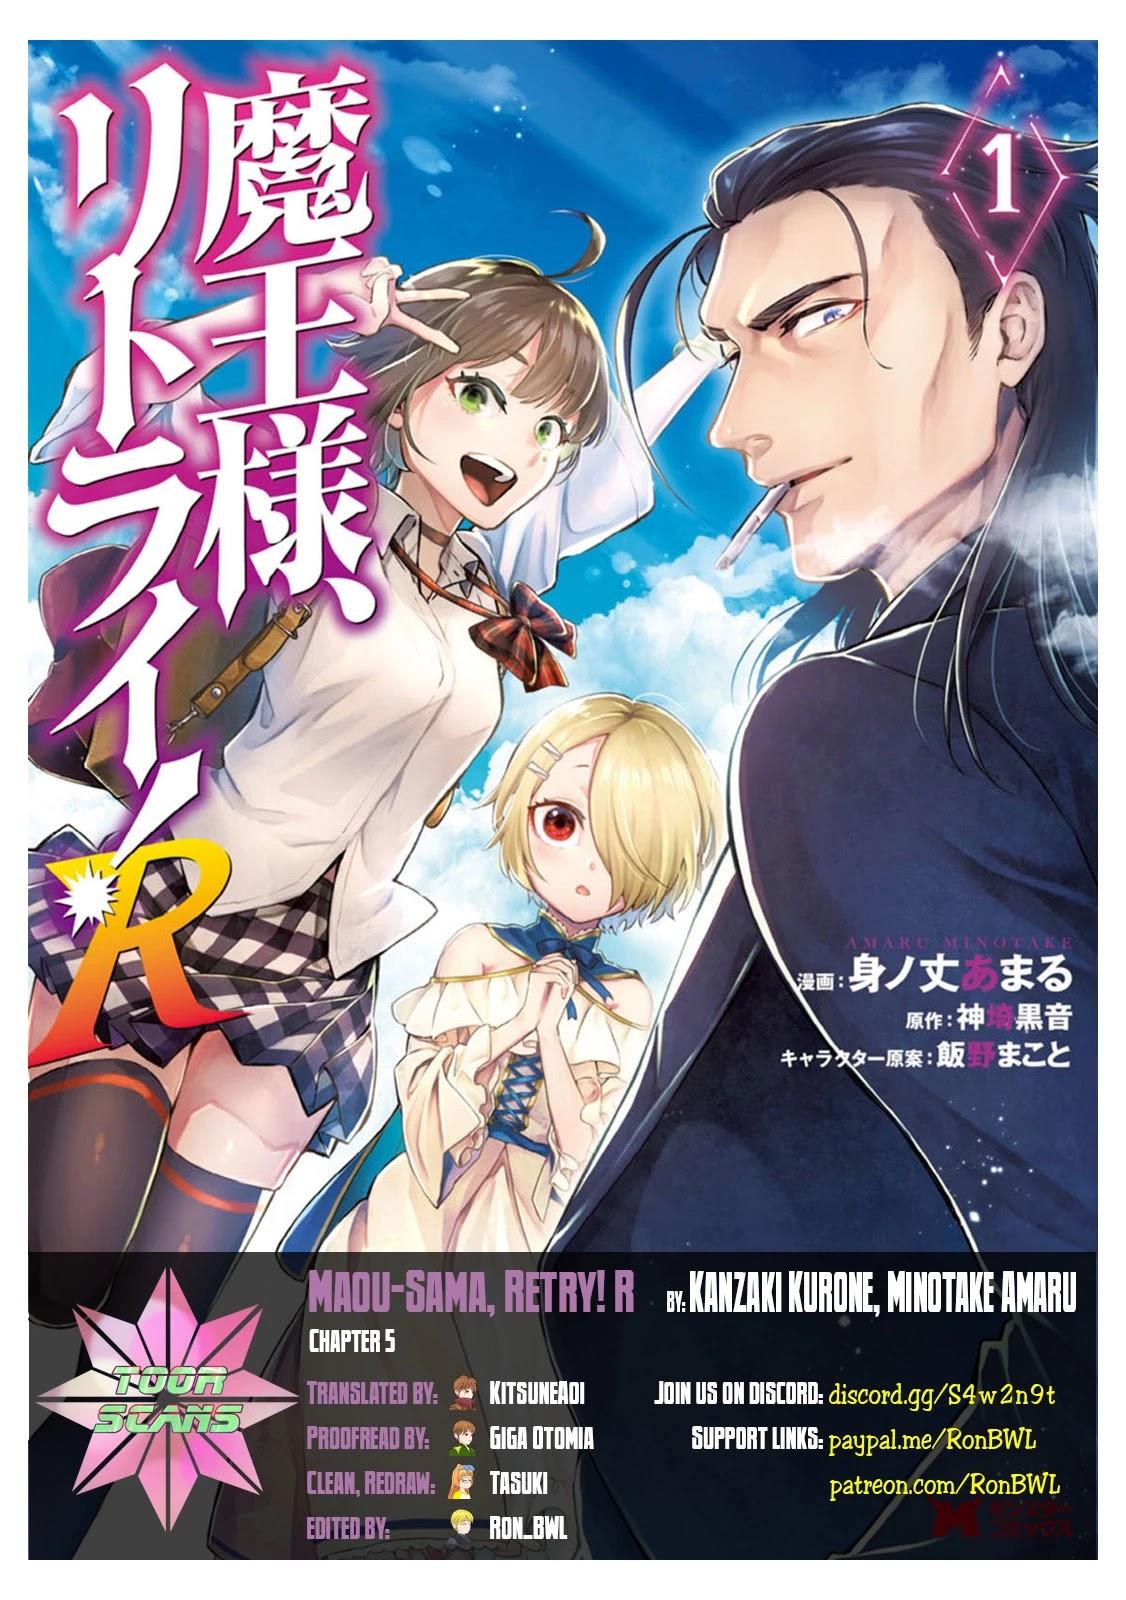 Read Maou-Sama, Retry! R Chapter 5: Another Journey - Manganelo